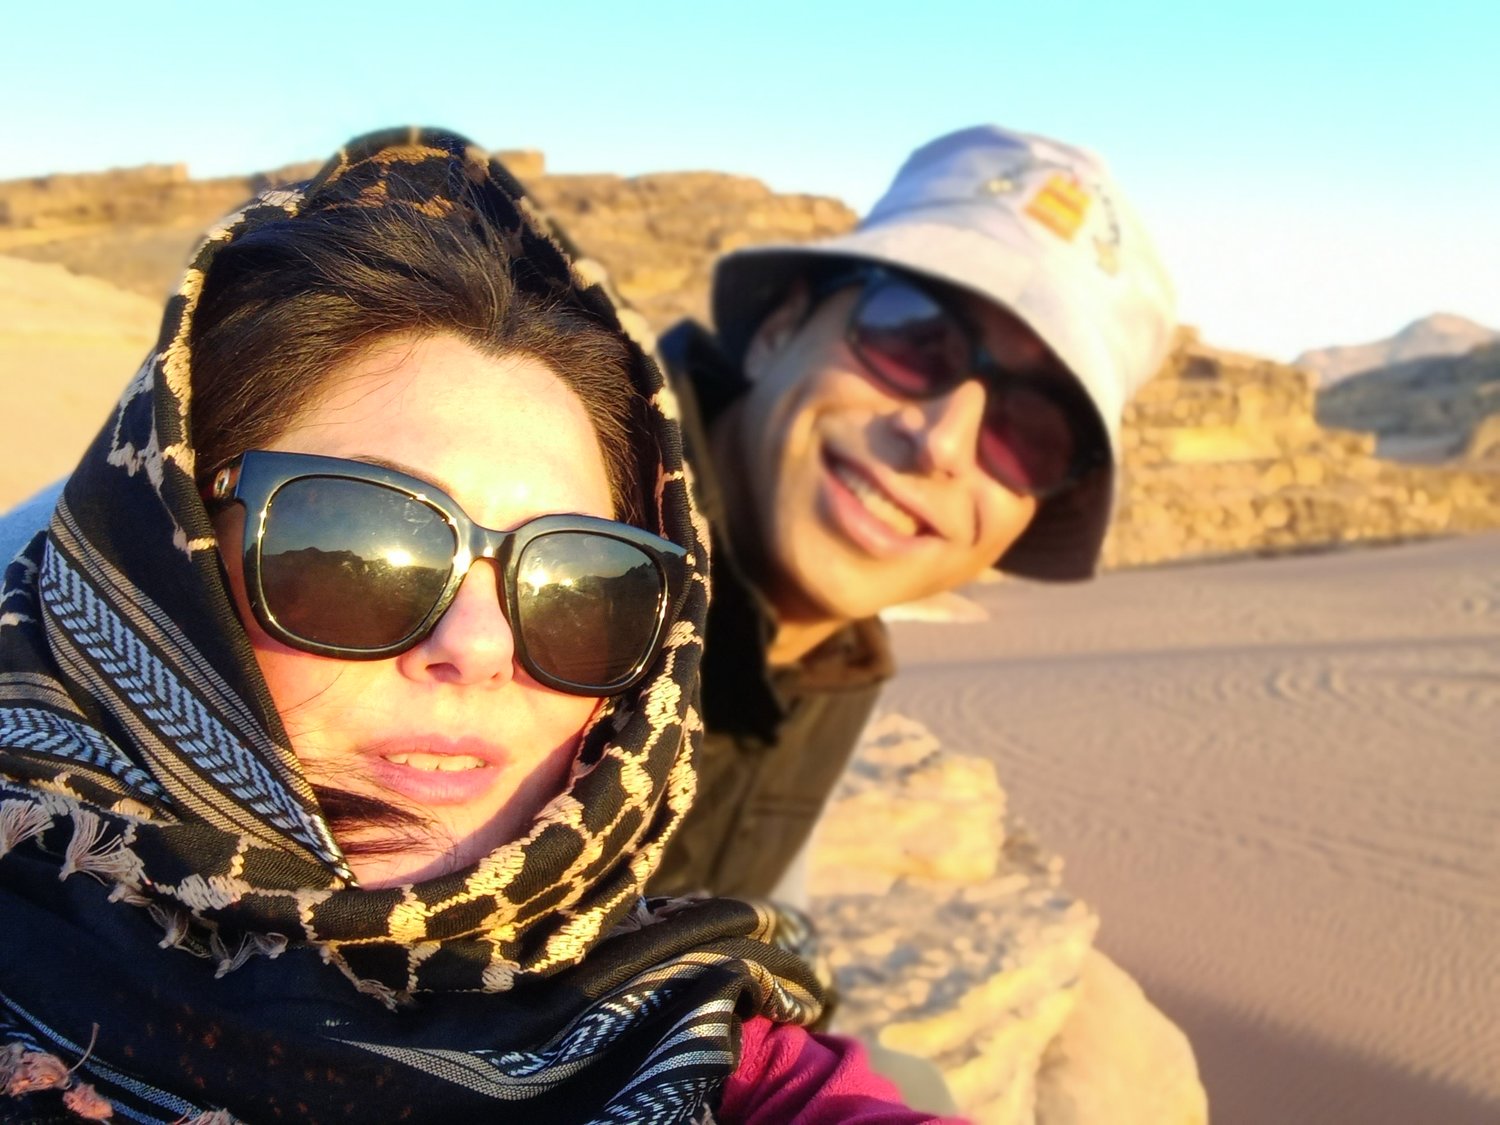 Me (Katherine Al Rashdan) wearing a non-traditional keffiyeh while on a daytrip to Wadi Rum in the South of Jordan. Some women in Jordan wear the keffiyeh to community and family events like parades and weddings.